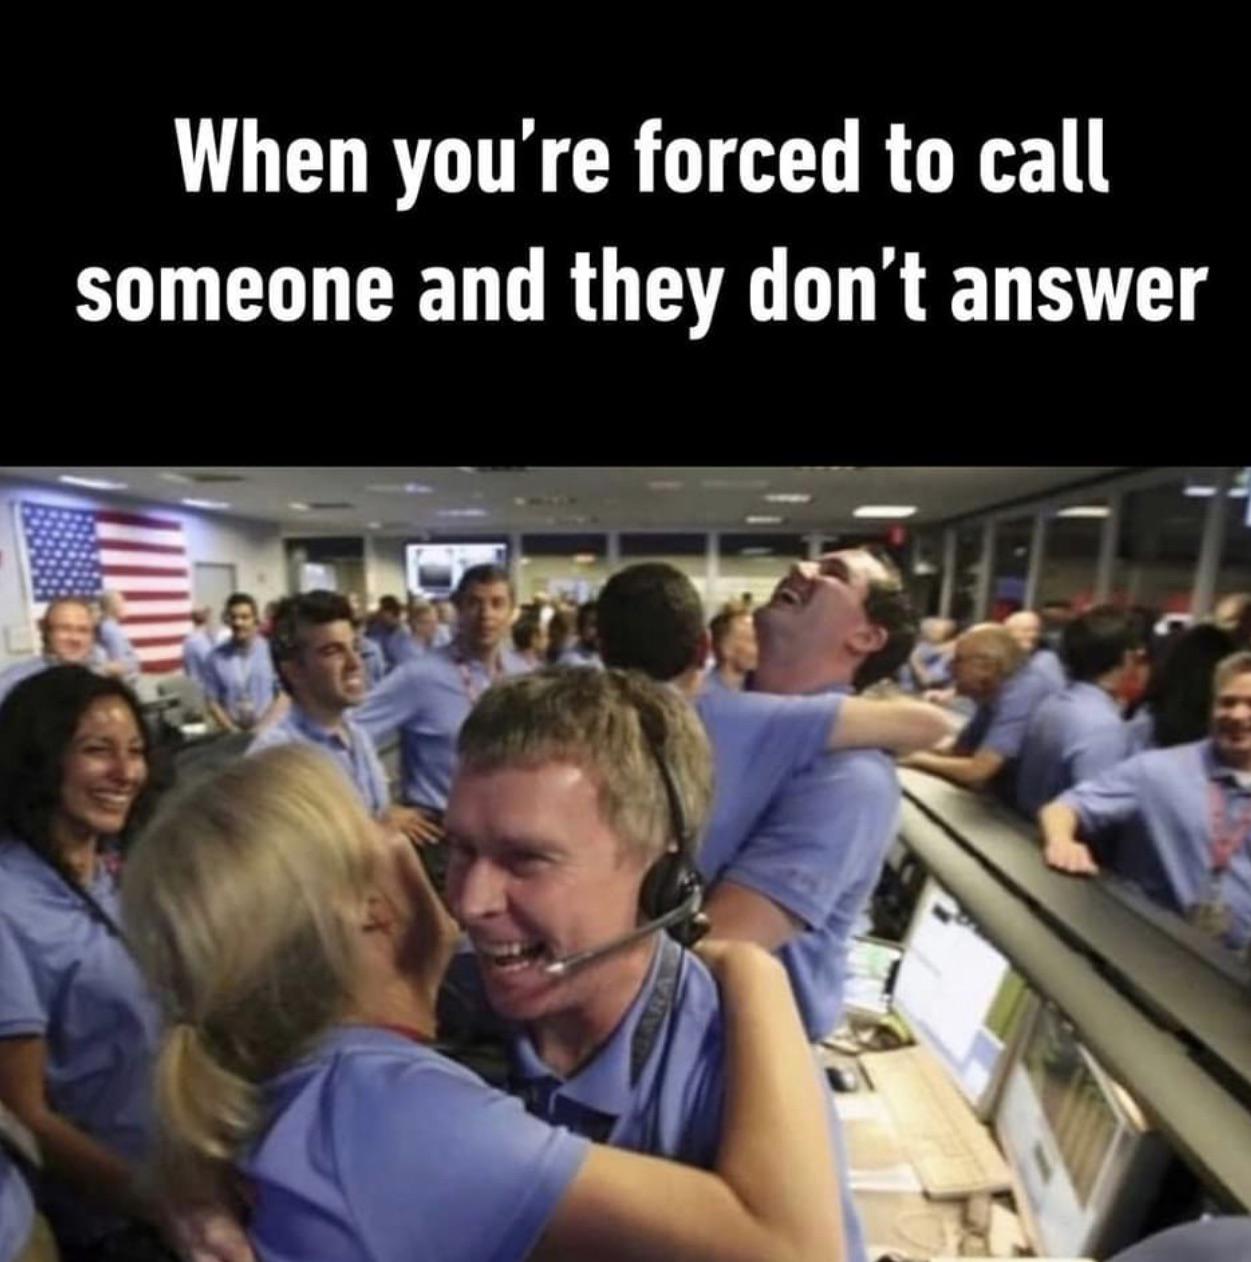 meme stream - celebracion nasa meme - When you're forced to call someone and they don't answer